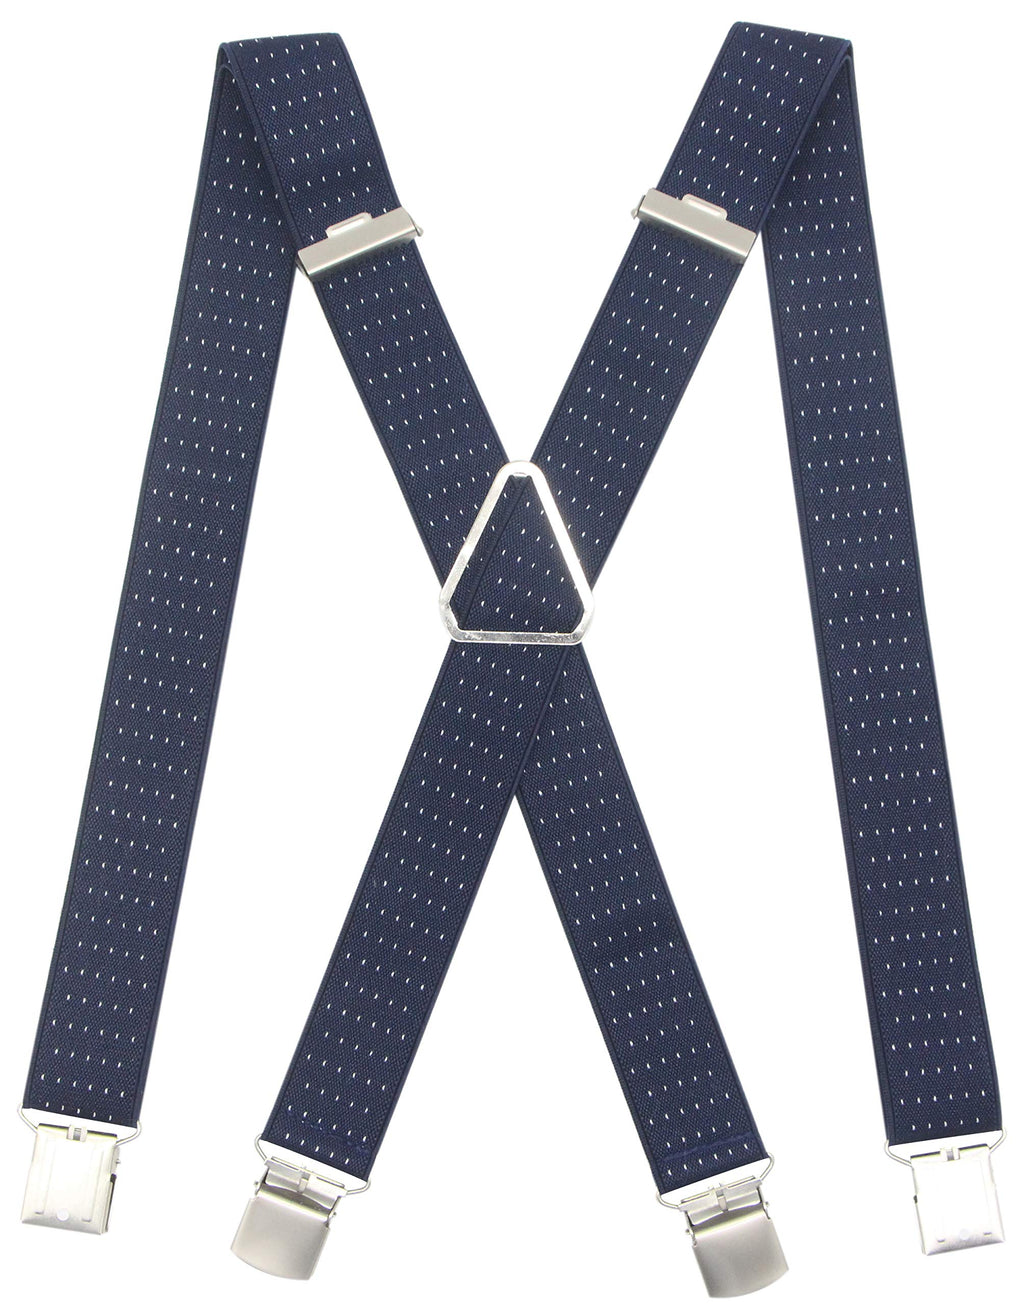 [Australia] - Men’s Suspender X-shape Wide Adjustable Strong Clips Braces Heavy Duty For Casual&Formal Navy Dots 